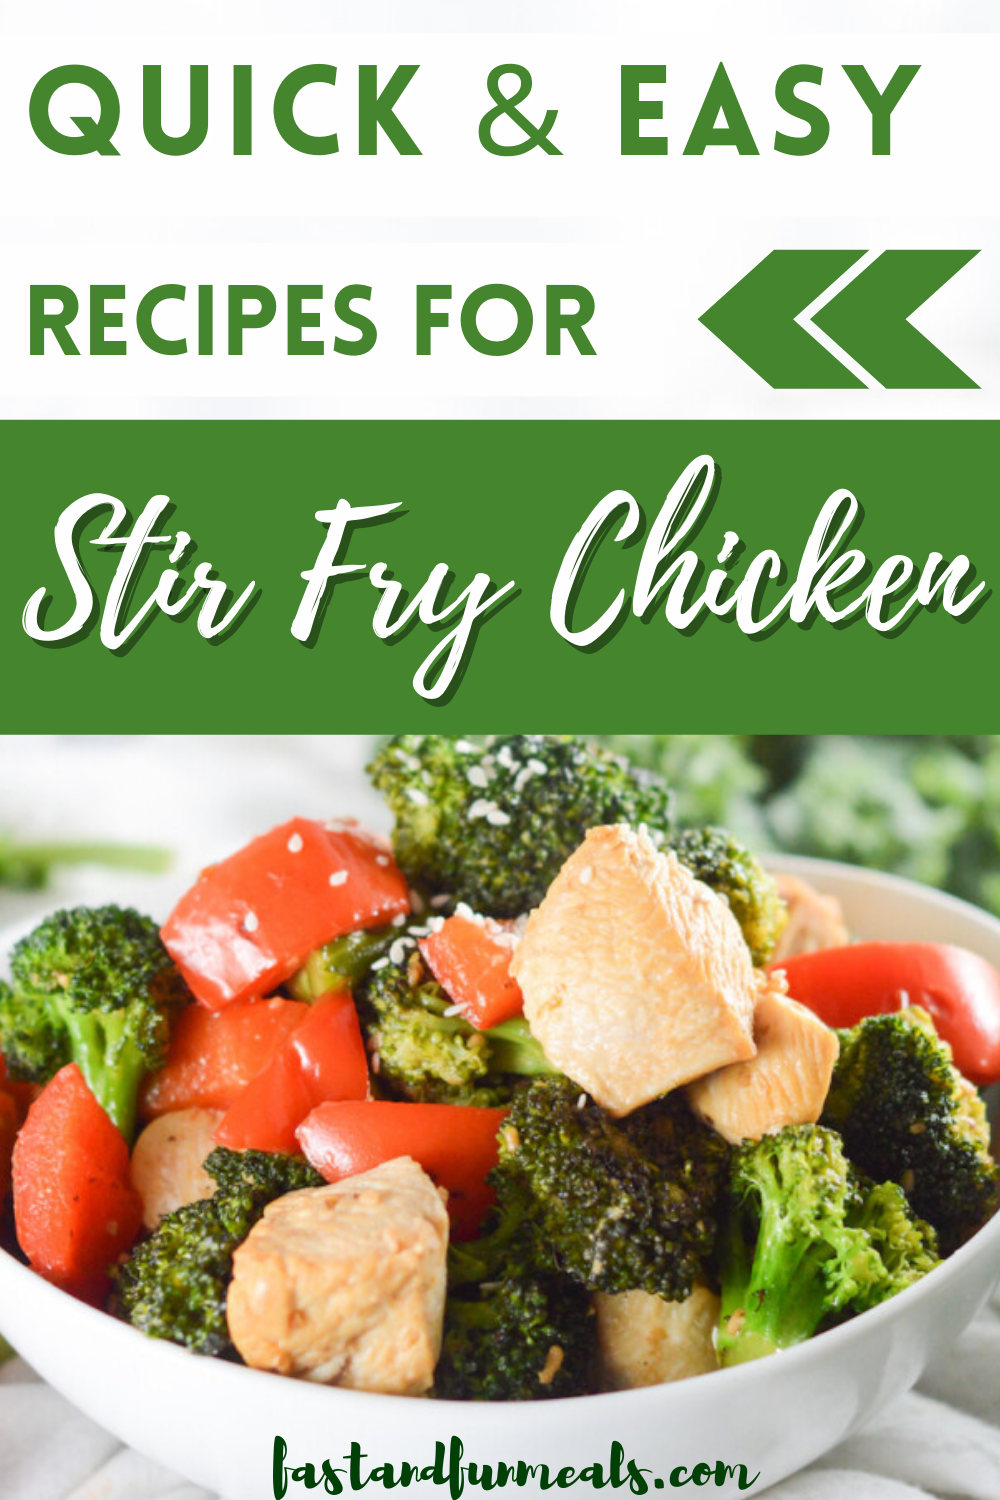 Pin showing Quick and Easy Recipes for Stir Fry Chicken